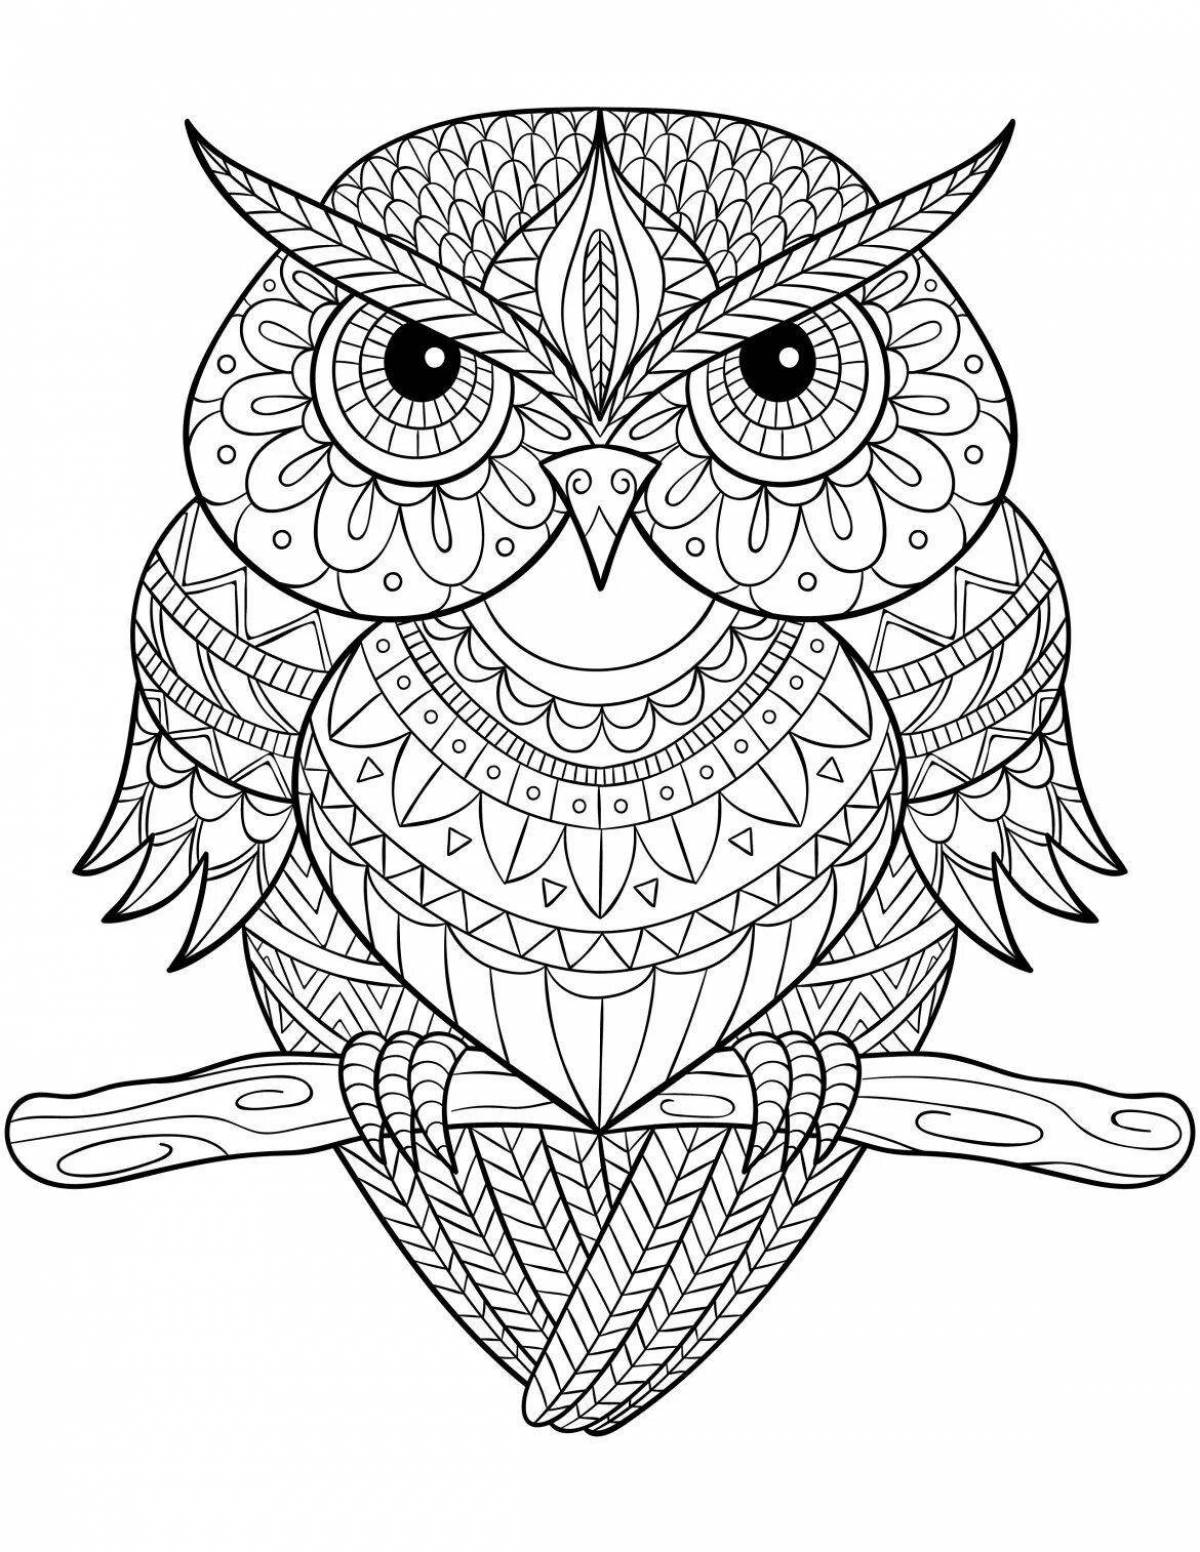 Delightful antistress coloring book